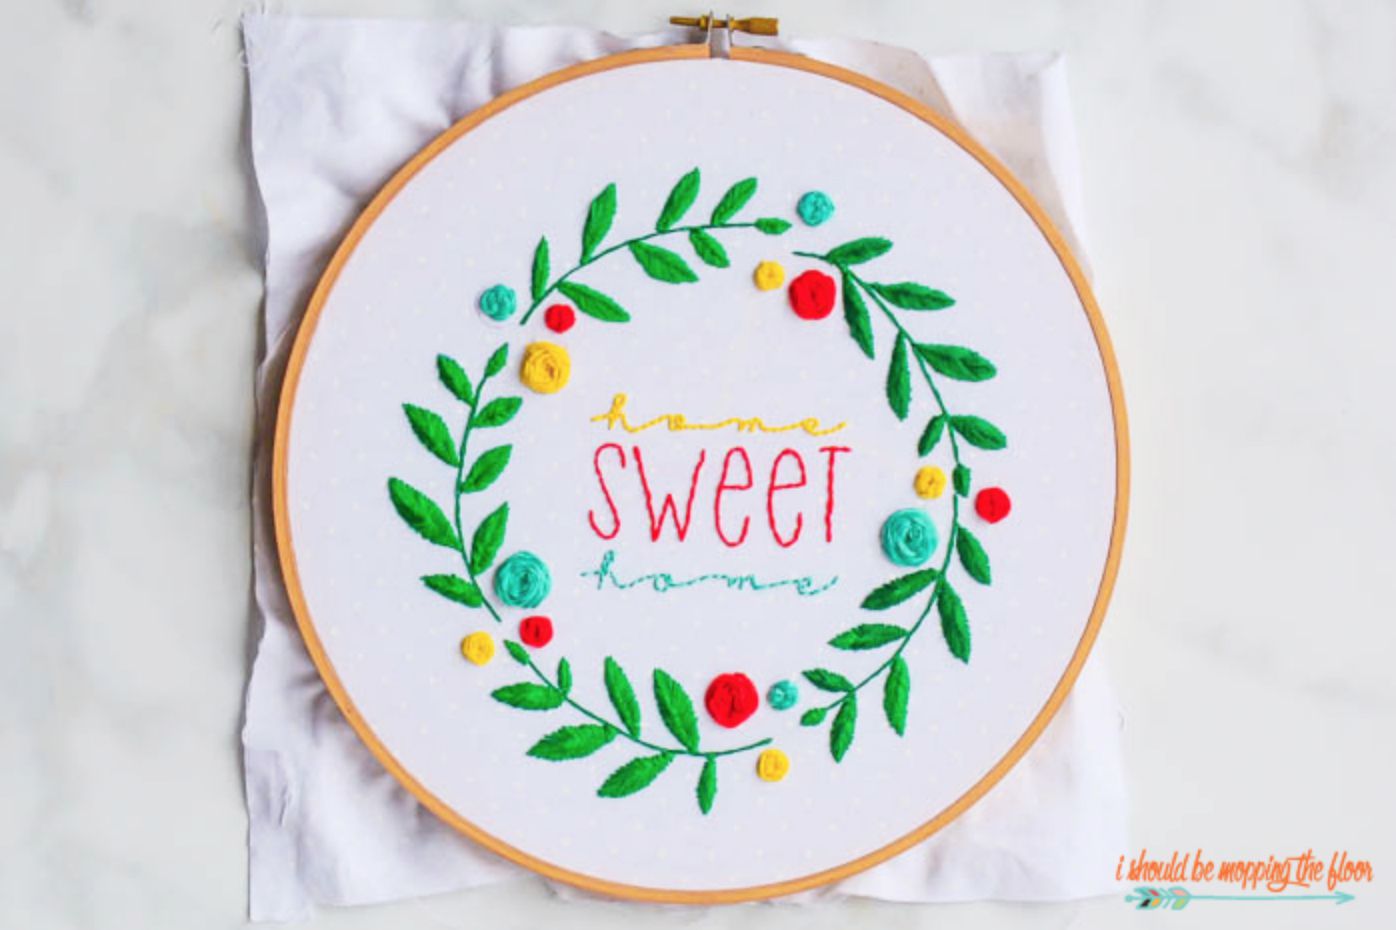 Home Sweet Home in a Floral Wreath Embroidery Pattern